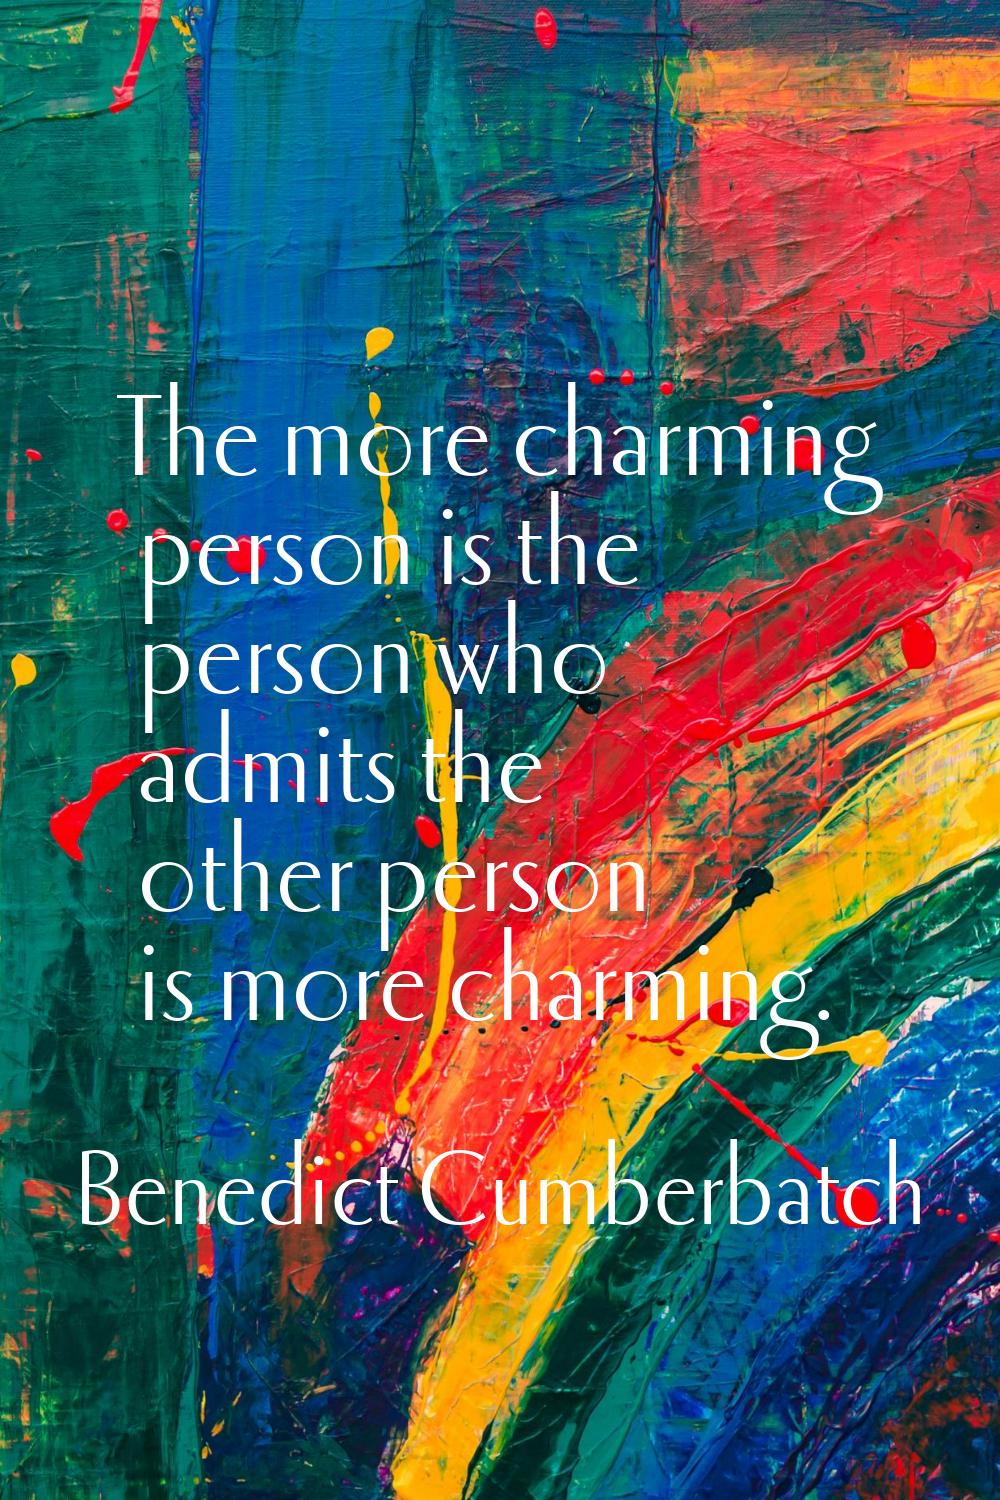 The more charming person is the person who admits the other person is more charming.